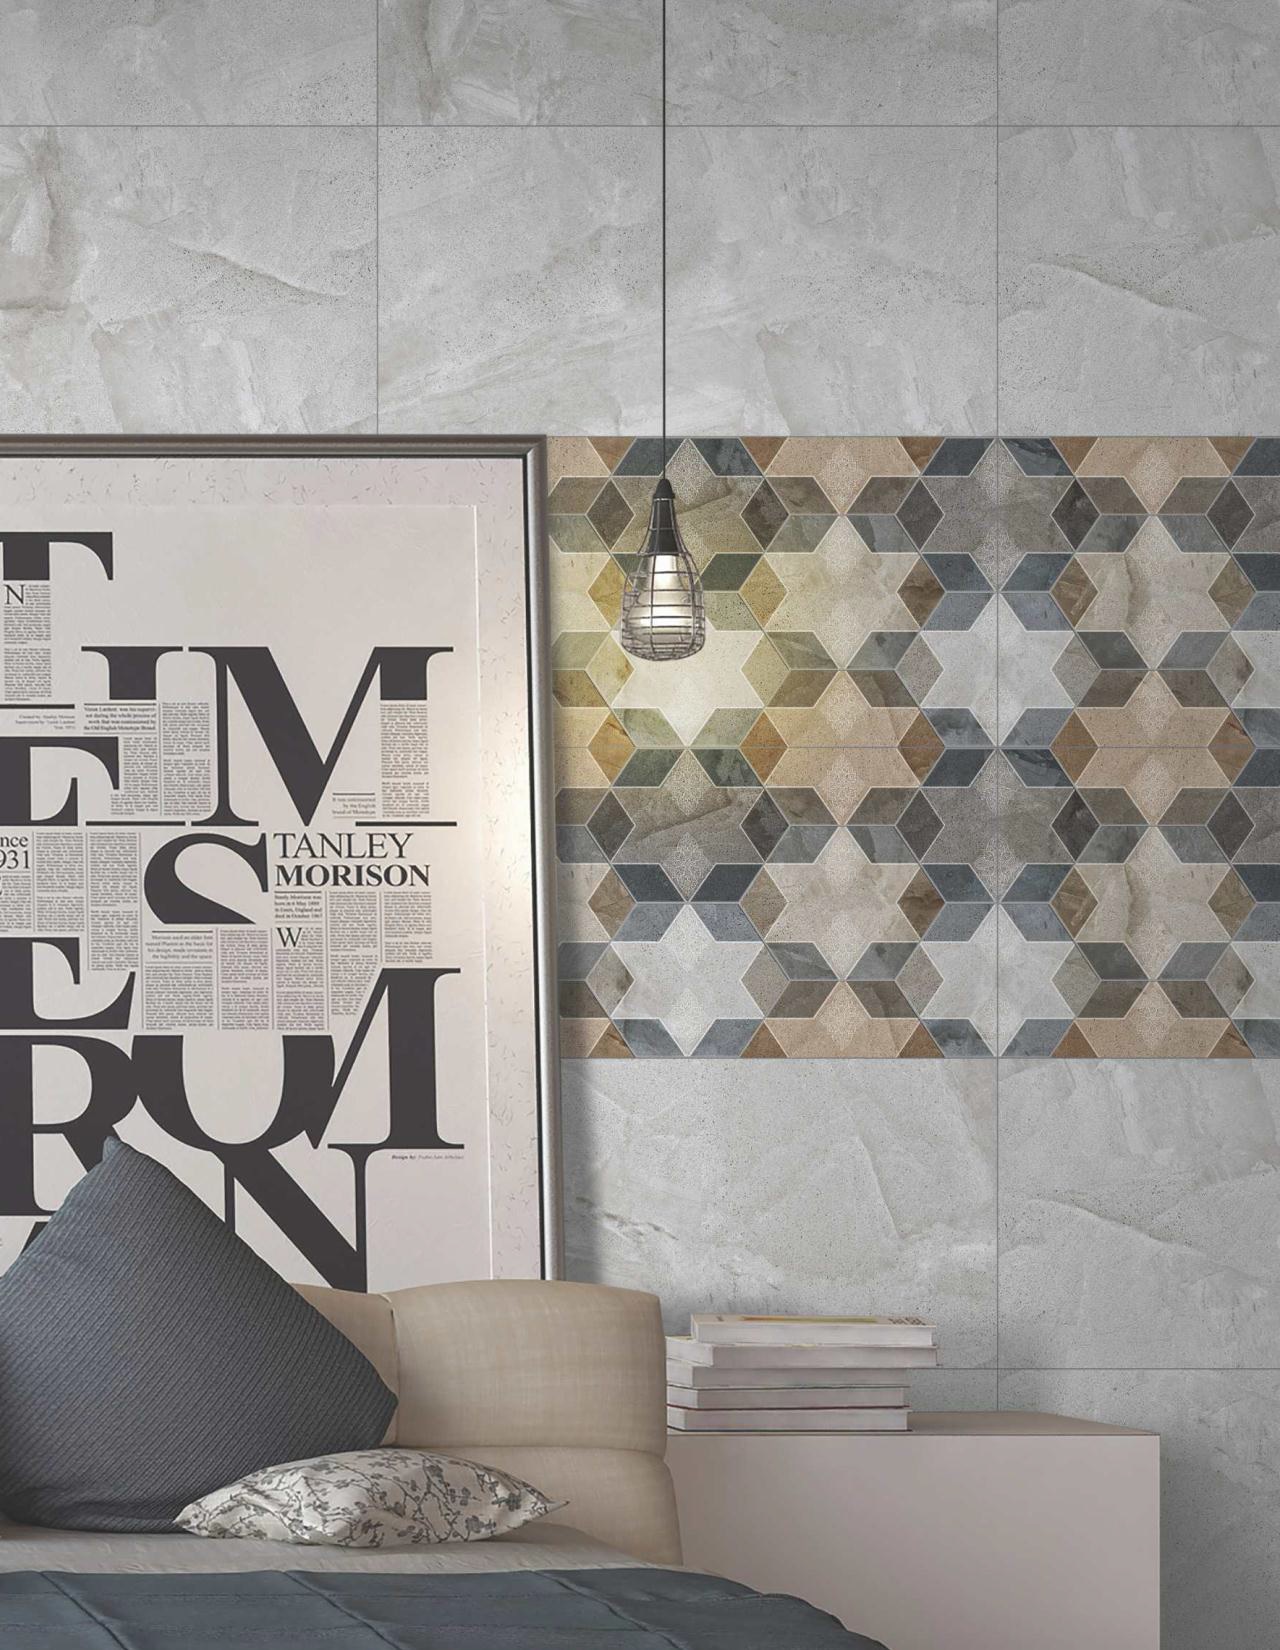 Printed Tiles For Wall, Printed Tiles Design in Delhi Ncr, India